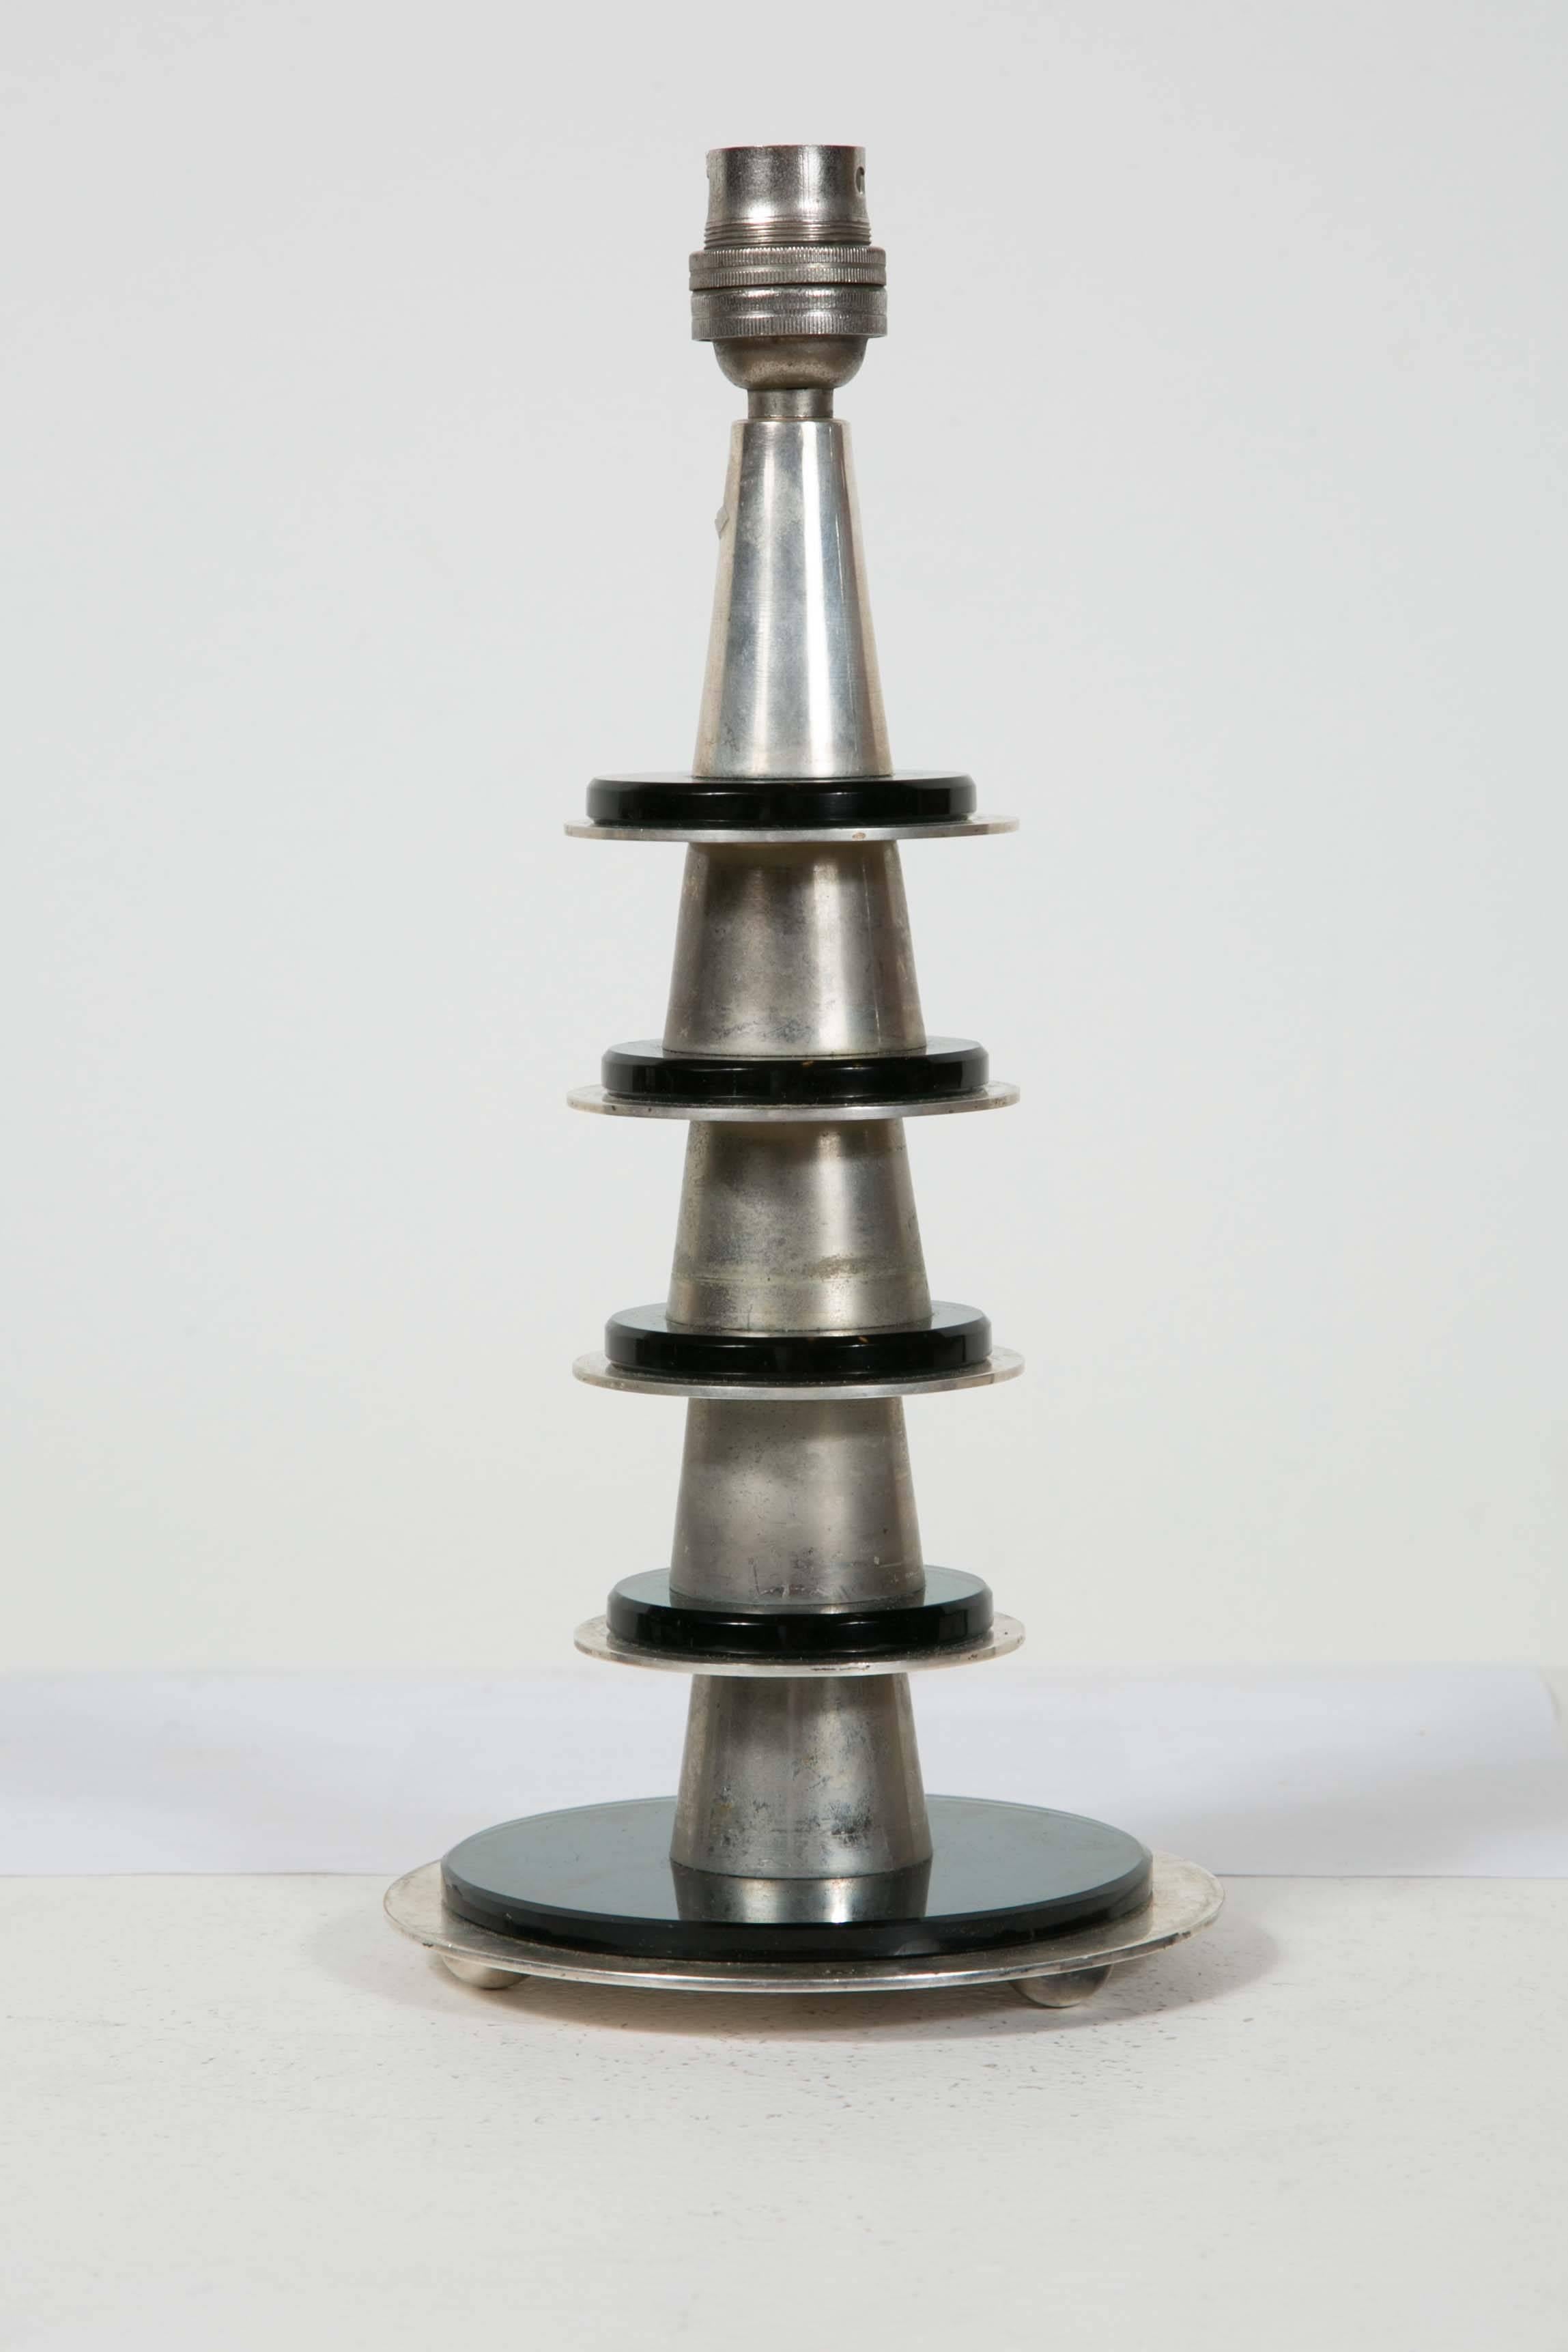 Modernist/Art Deco table lamp by Maison Desny.
Nickel-plated bronze and dark green glass disks.
Stamp 